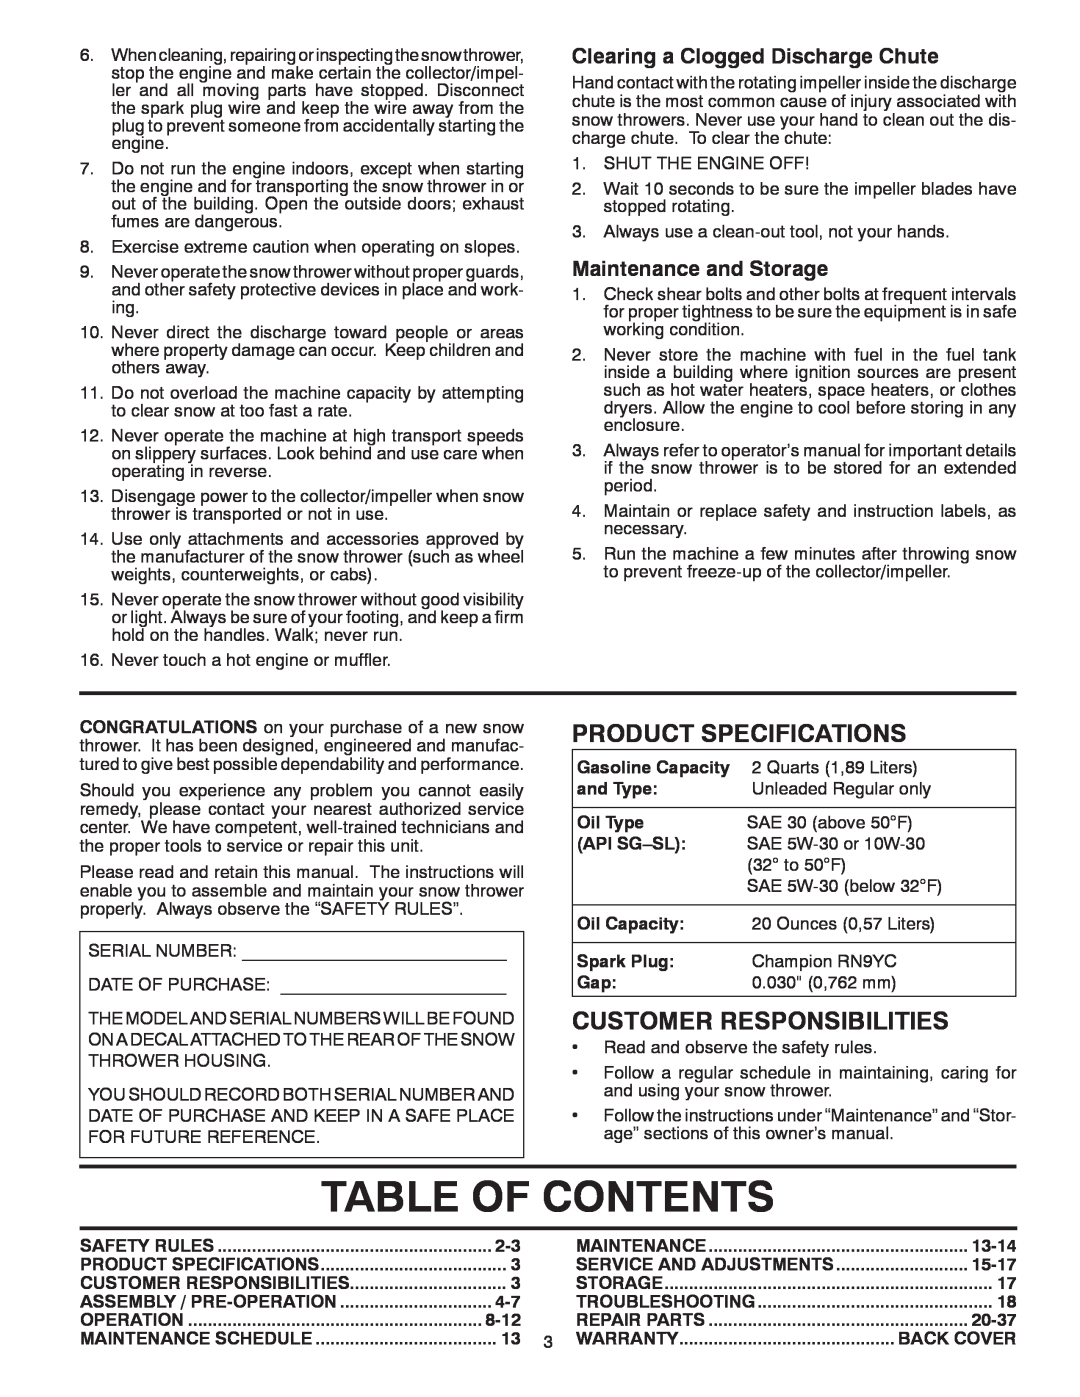 Poulan 424003 Table Of Contents, Product Specifications, Customer Responsibilities, Clearing a Clogged Discharge Chute 